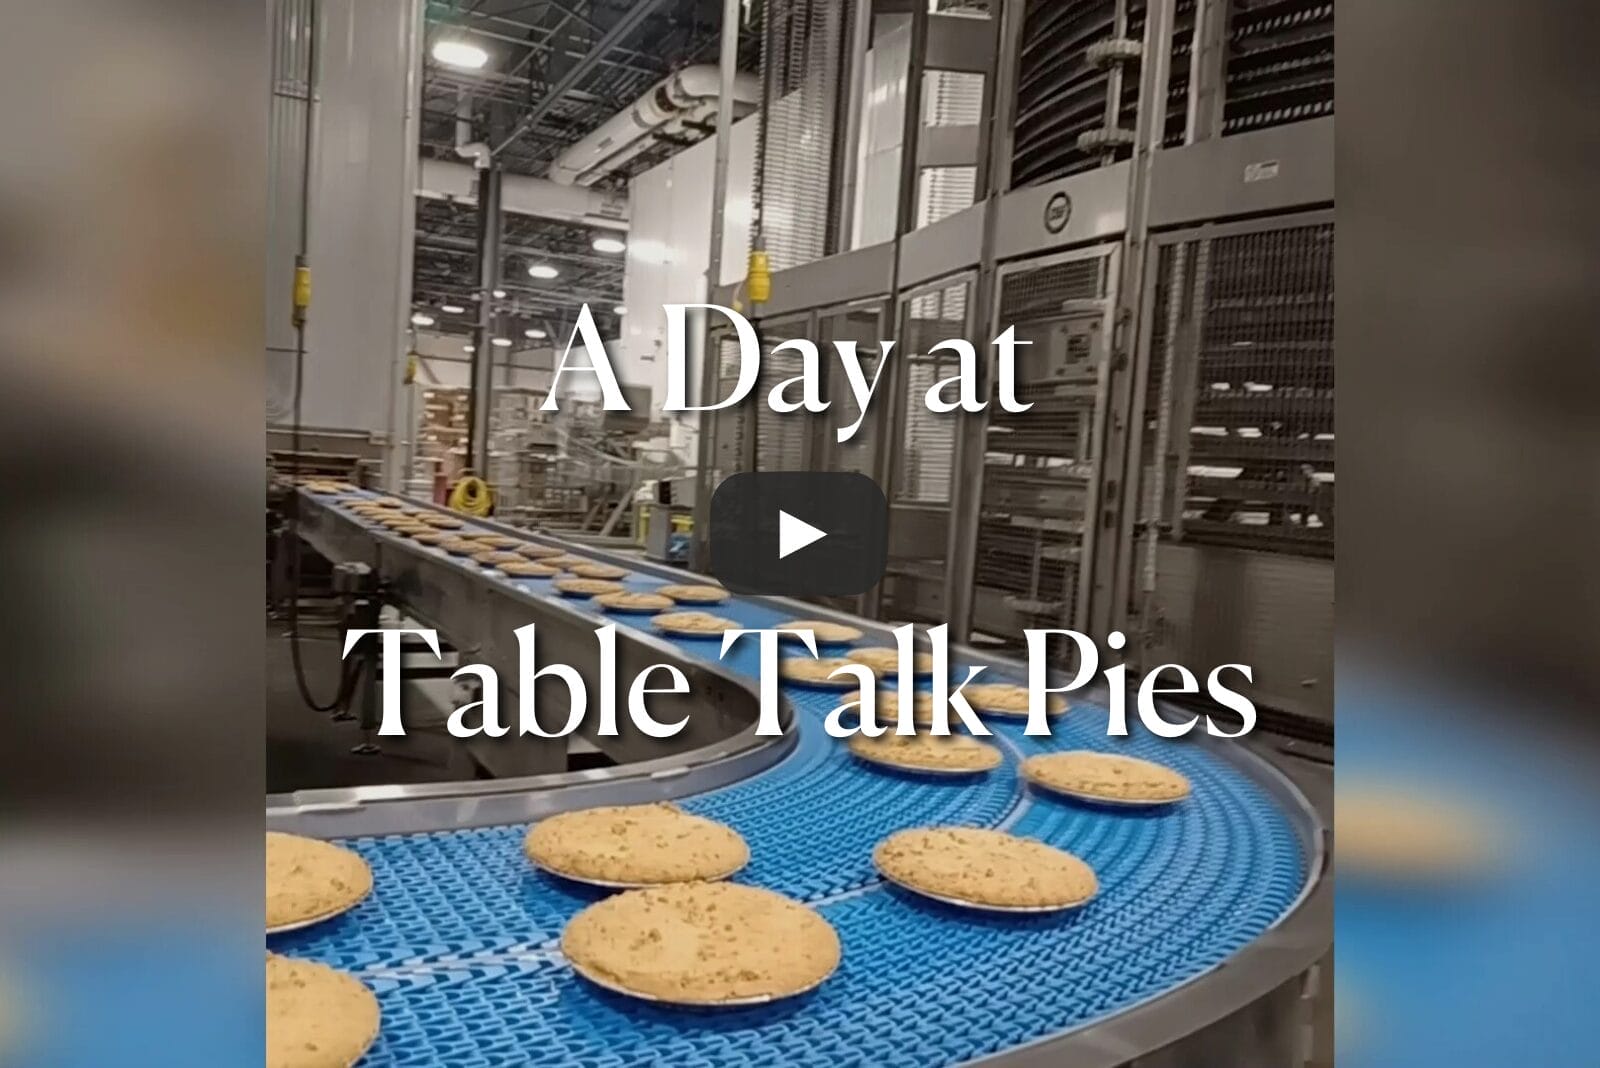 Pies on conveyor belt at Table Talk Pies commercial baking facility.